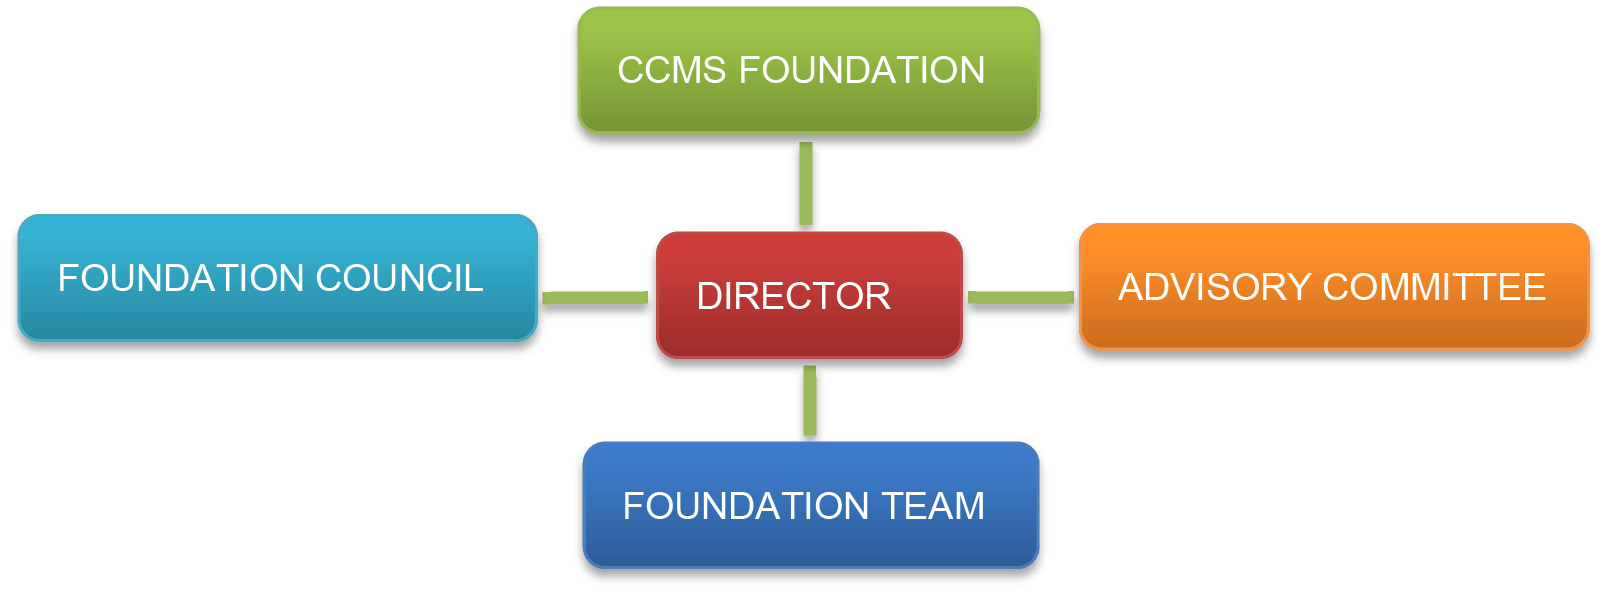 CCMS Governance Structure